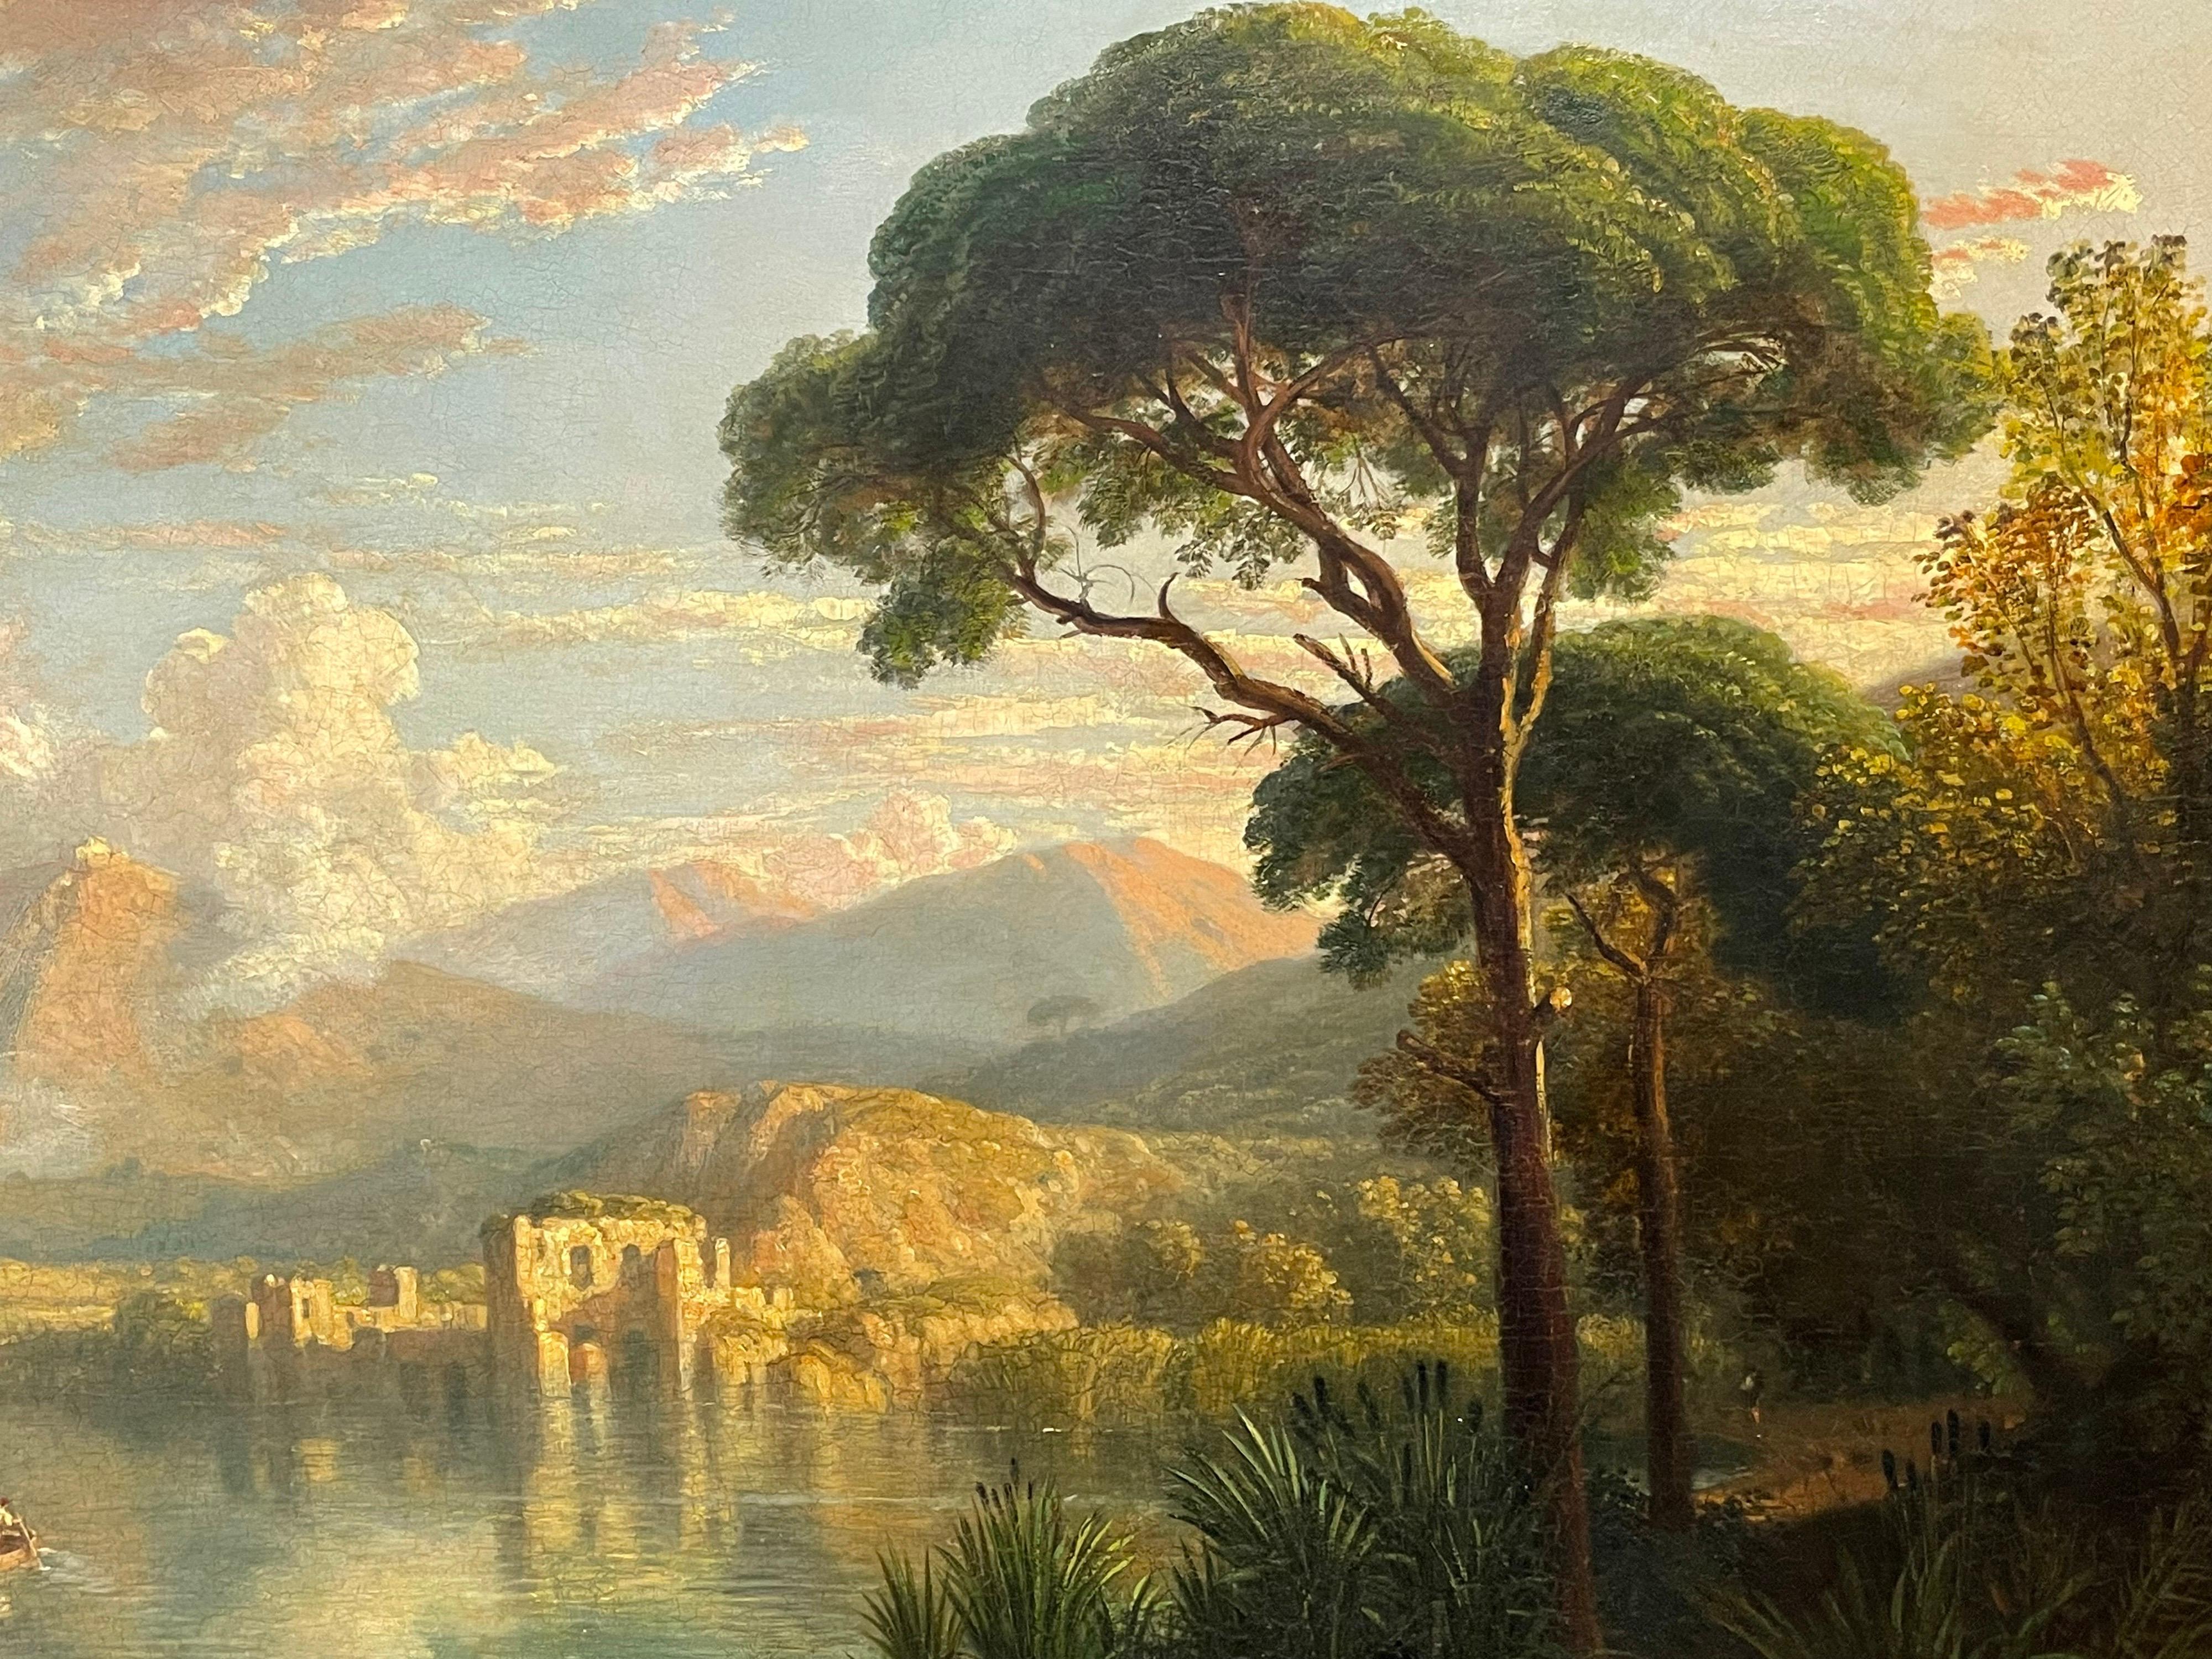 Artist/ School: William Havell (British, 1782-1857)

Title: The Ruins on Lago d’Averno on Lake Avernus, near Naples

Medium: oil painting on canvas, framed

Size: canvas: 23 x 31 inches, framed 28 x 36 inches. 
         
Provenance: private